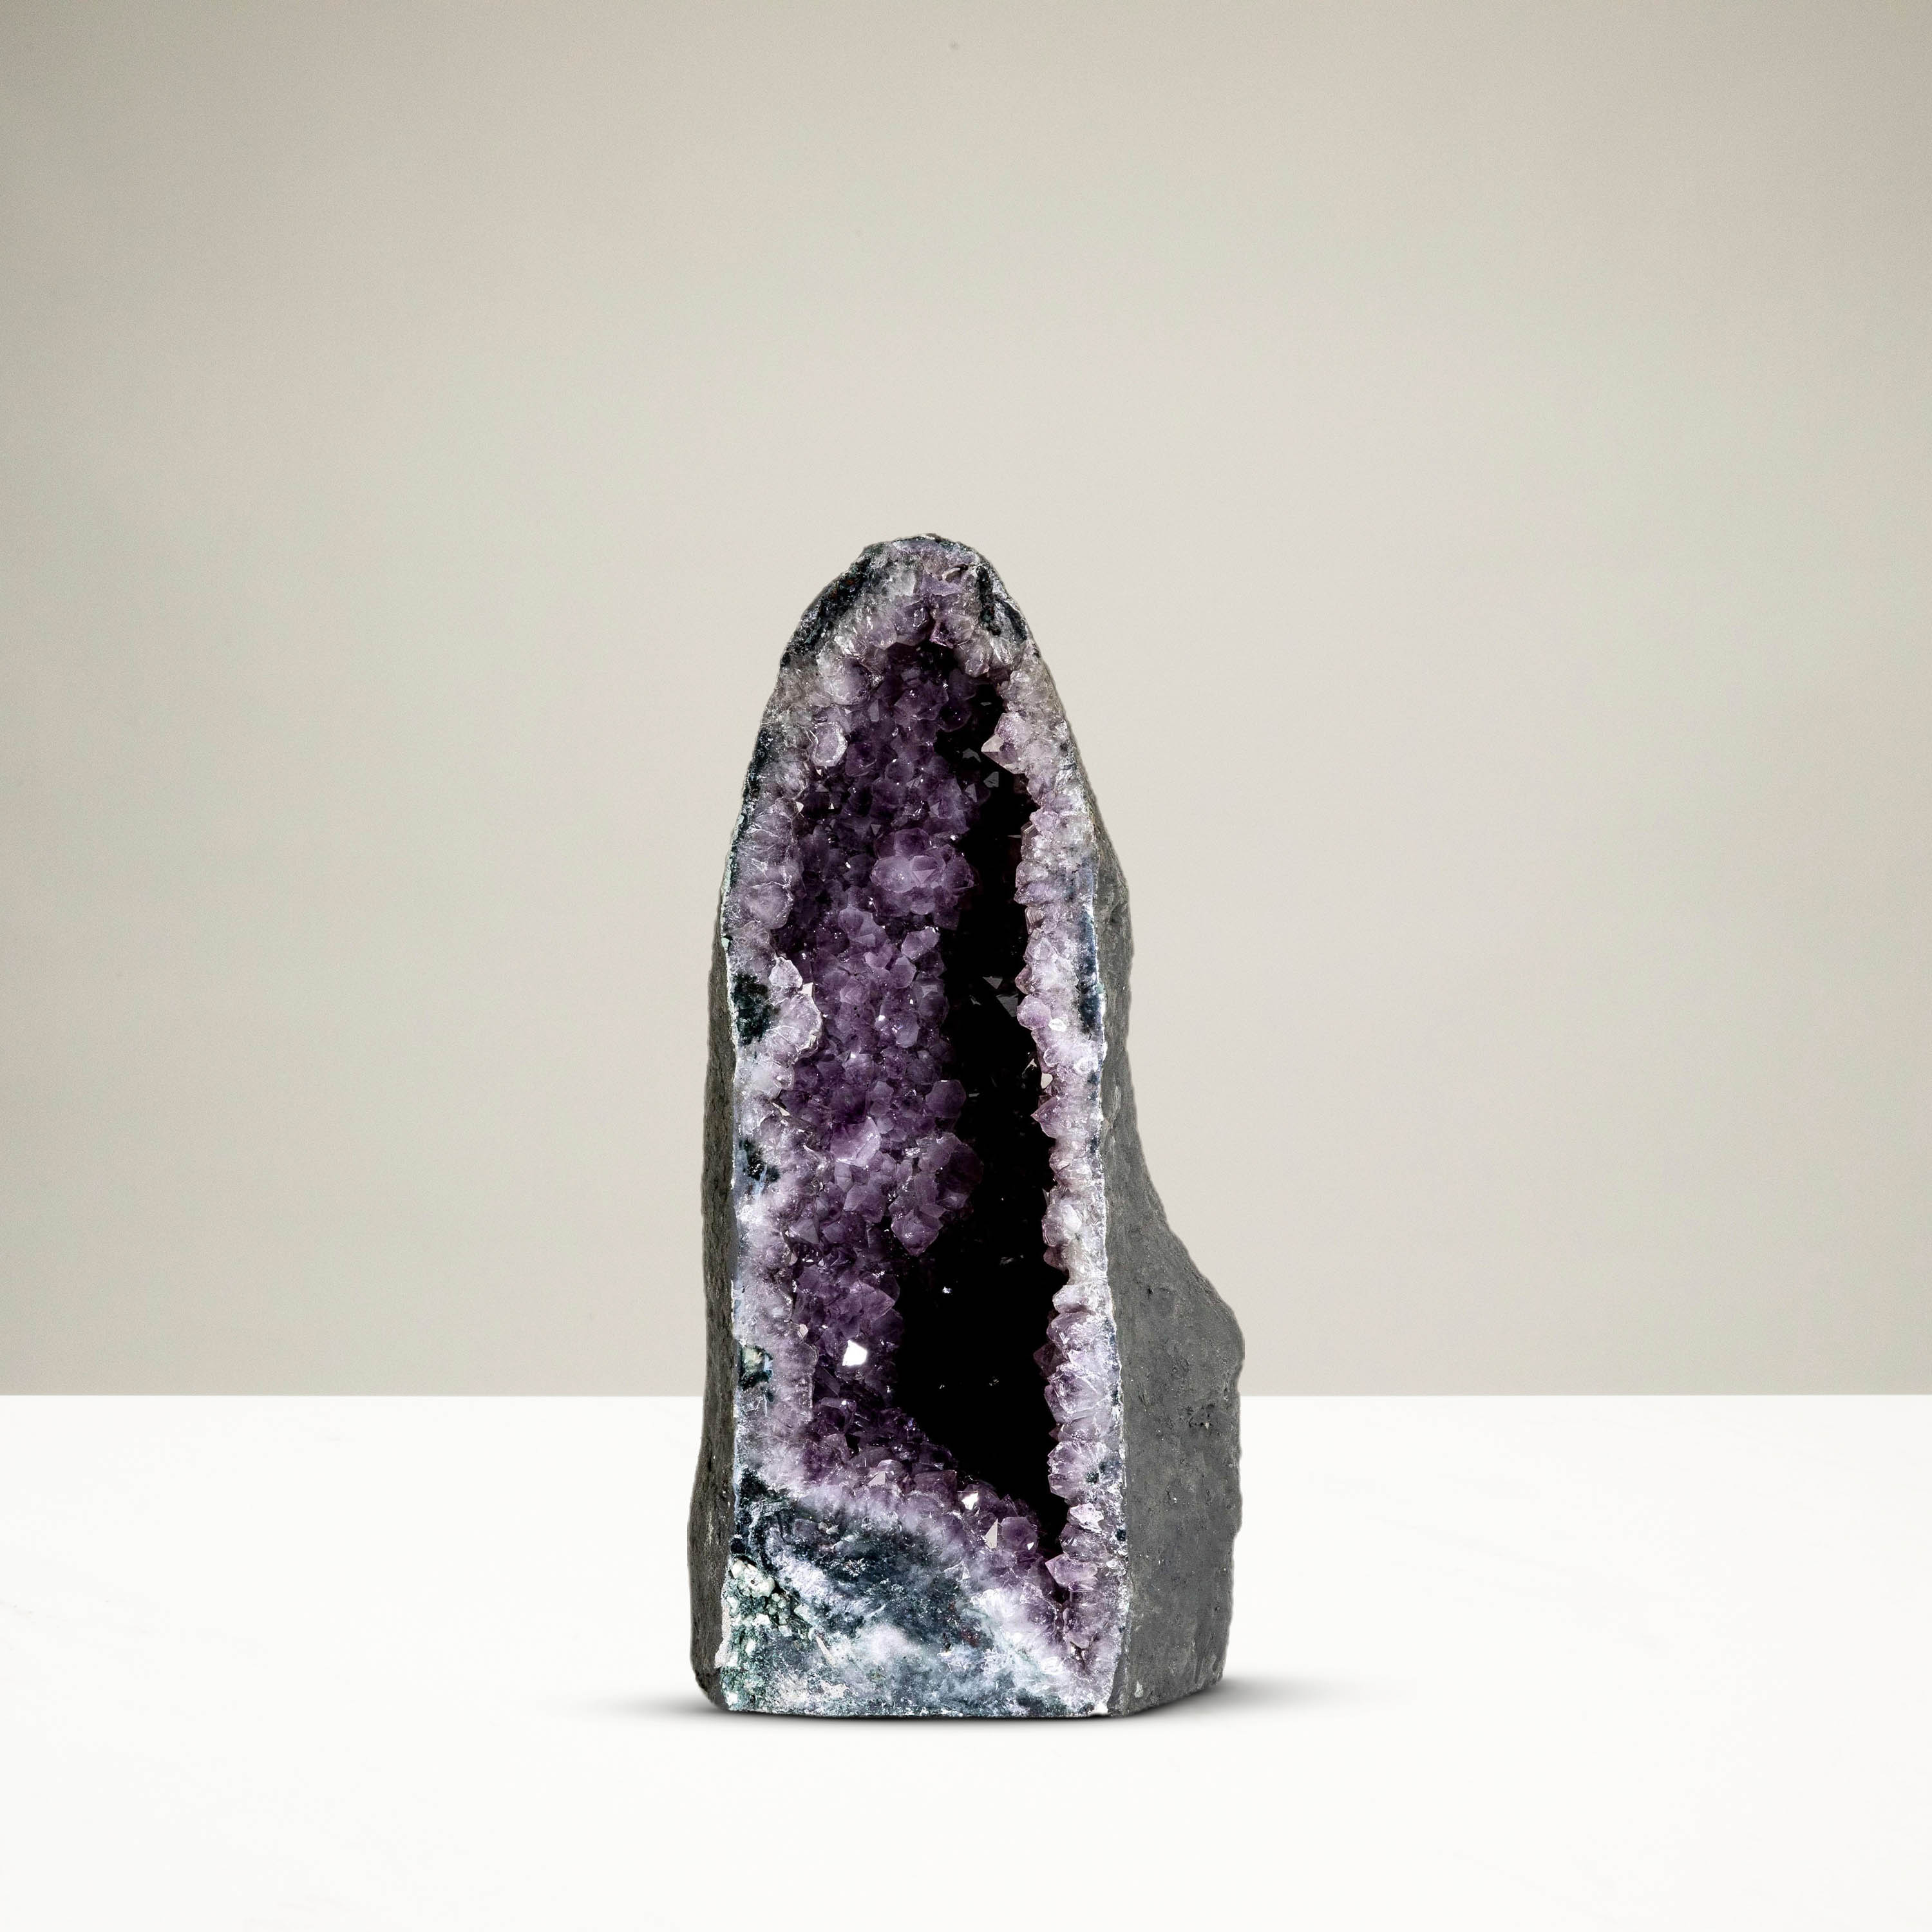 Kalifano Amethyst Natural Brazilian Amethyst Crystal Geode Cathedral - 18 in / 54 lbs BAG4800.007